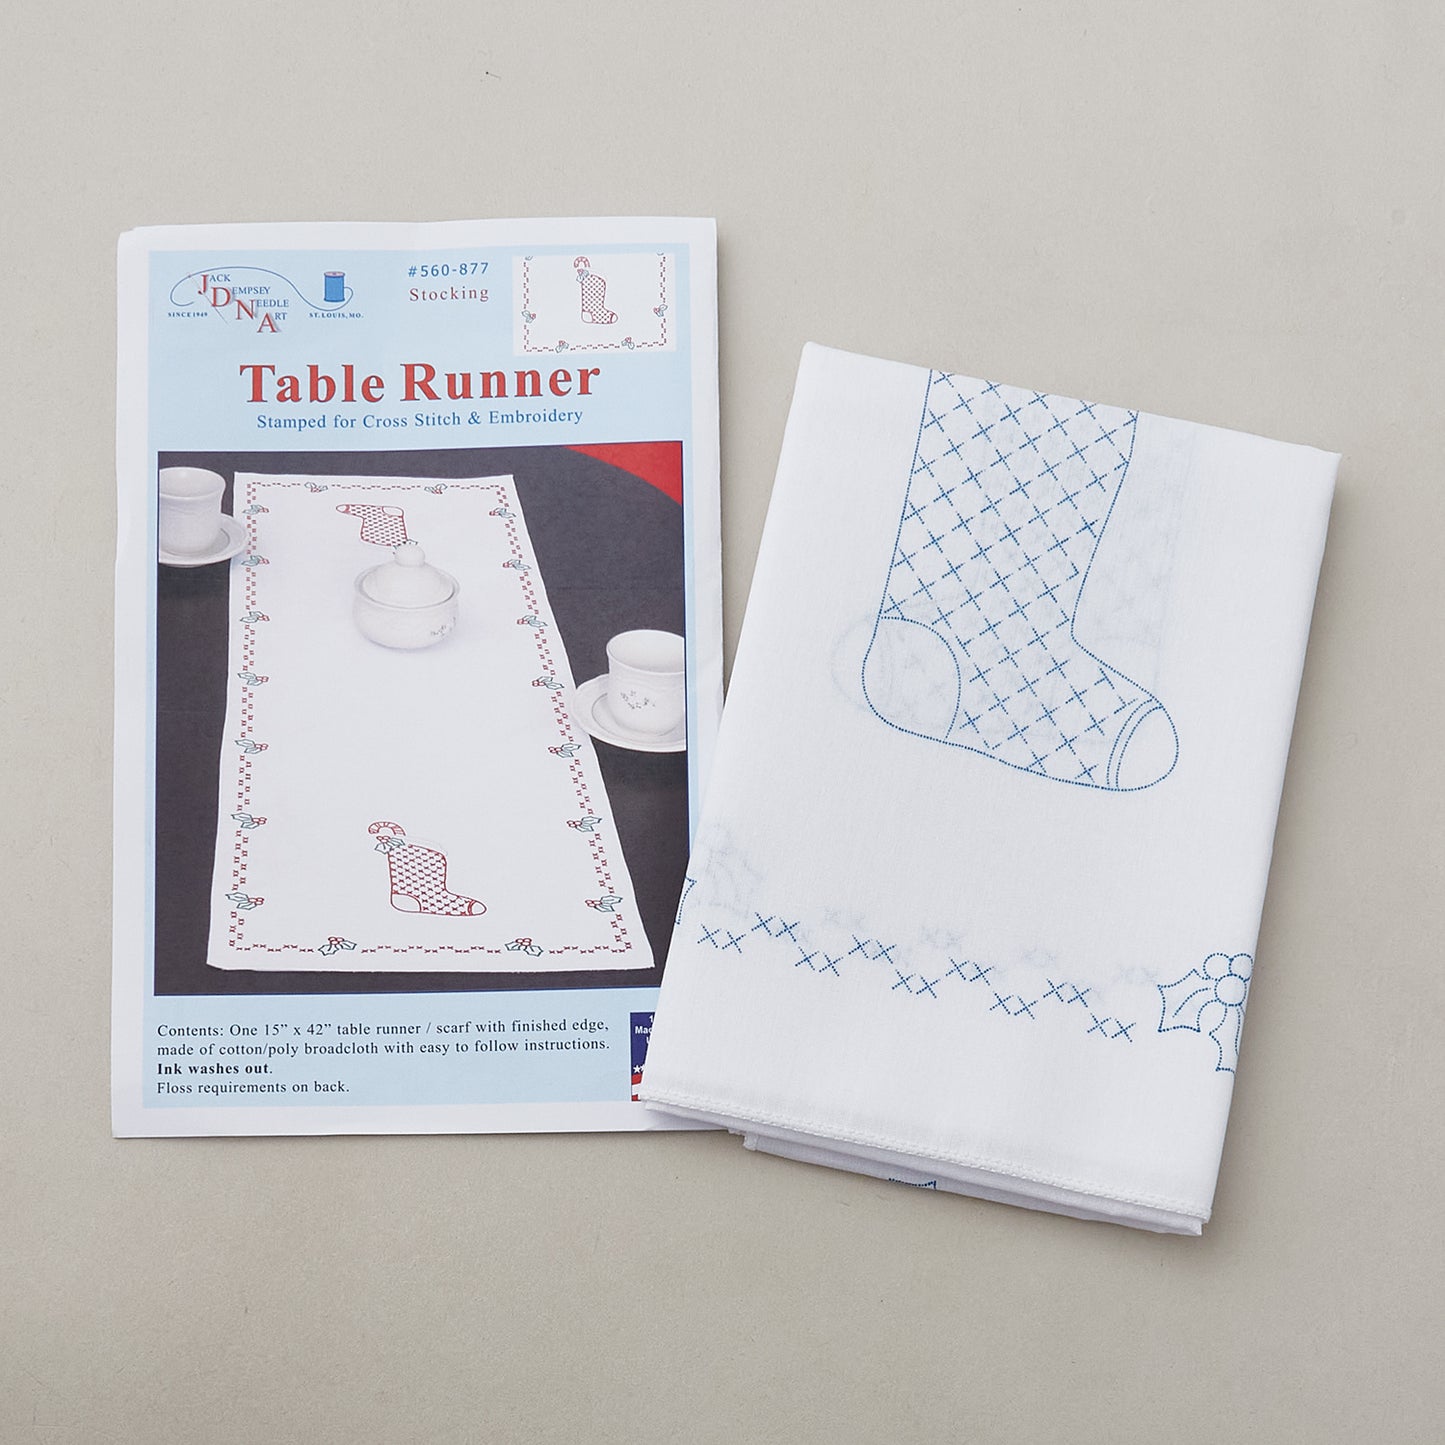 Stocking Embroidery Table Runner Kit Alternative View #3